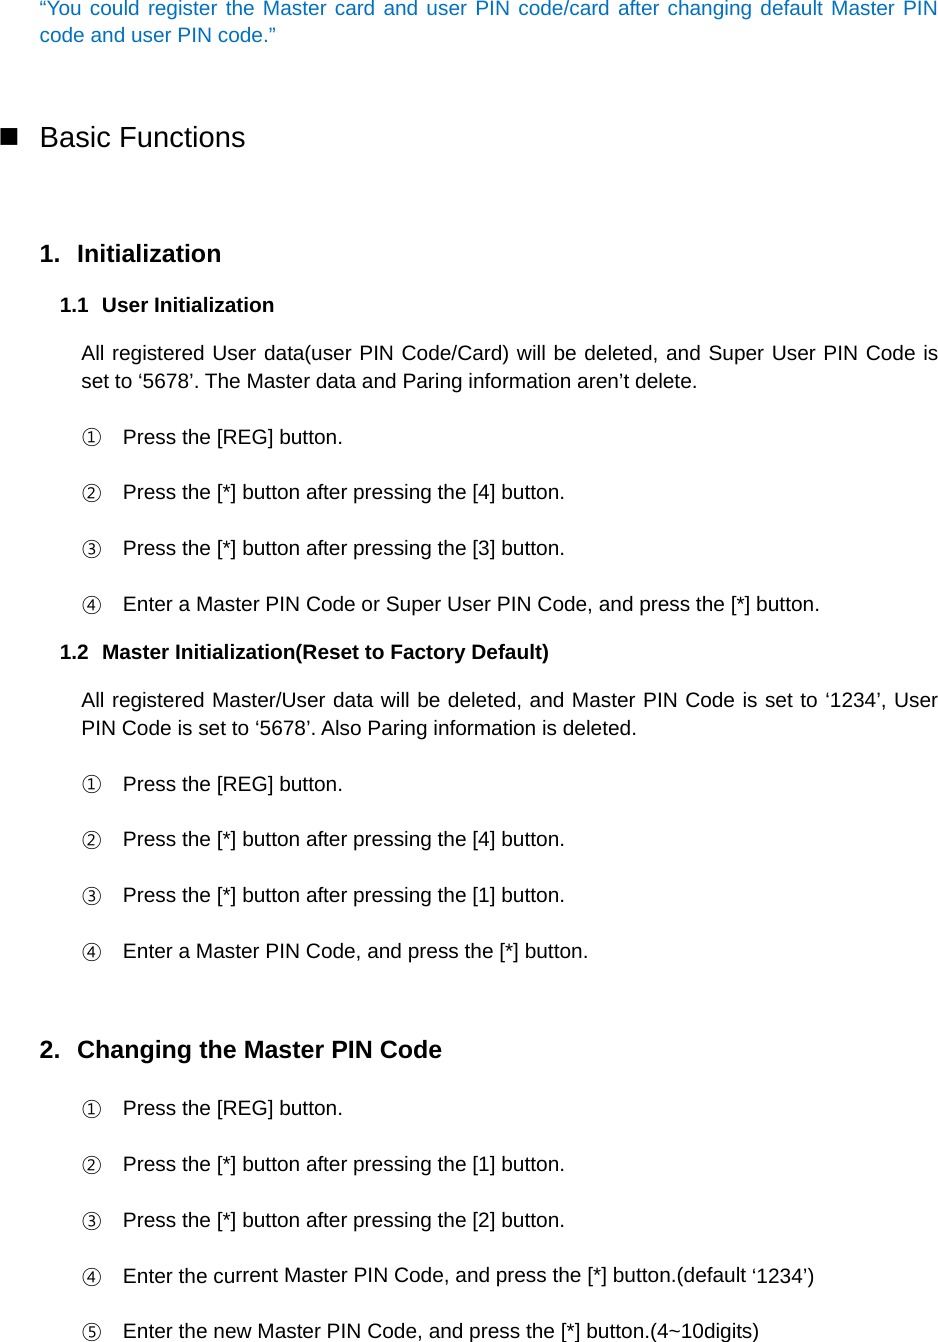 “You could register the Master card and user PIN code/card after changing default Master PIN code and user PIN code.” Basic Functions1. Initialization1.1 User Initialization All registered User data(user PIN Code/Card) will be deleted, and Super User PIN Code is set to ‘5678’. The Master data and Paring information aren’t delete. ①Press the [REG] button.②Press the [*] button after pressing the [4] button.③Press the [*] button after pressing the [3] button.④Enter a Master PIN Code or Super User PIN Code, and press the [*] button.1.2  Master Initialization(Reset to Factory Default) All registered Master/User data will be deleted, and Master PIN Code is set to ‘1234’, User PIN Code is set to ‘5678’. Also Paring information is deleted. ①Press the [REG] button.②Press the [*] button after pressing the [4] button.③Press the [*] button after pressing the [1] button.④Enter a Master PIN Code, and press the [*] button.2. Changing the Master PIN Code①Press the [REG] button.②Press the [*] button after pressing the [1] button.③Press the [*] button after pressing the [2] button.④Enter the current Master PIN Code, and press the [*] button.(default ‘1234’)⑤Enter the new Master PIN Code, and press the [*] button.(4~10digits)